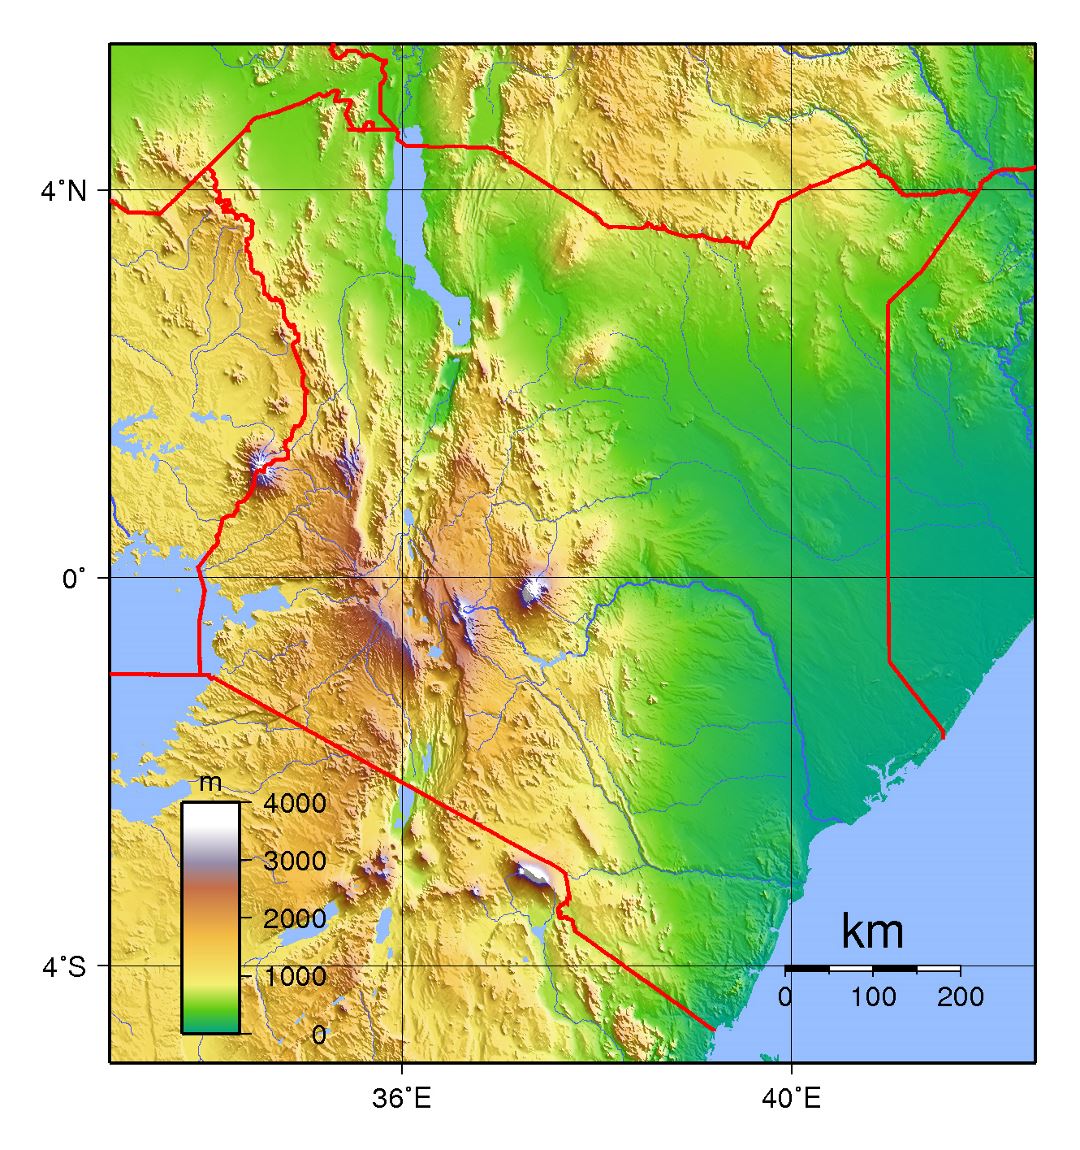 Detailed topographical map of Kenya